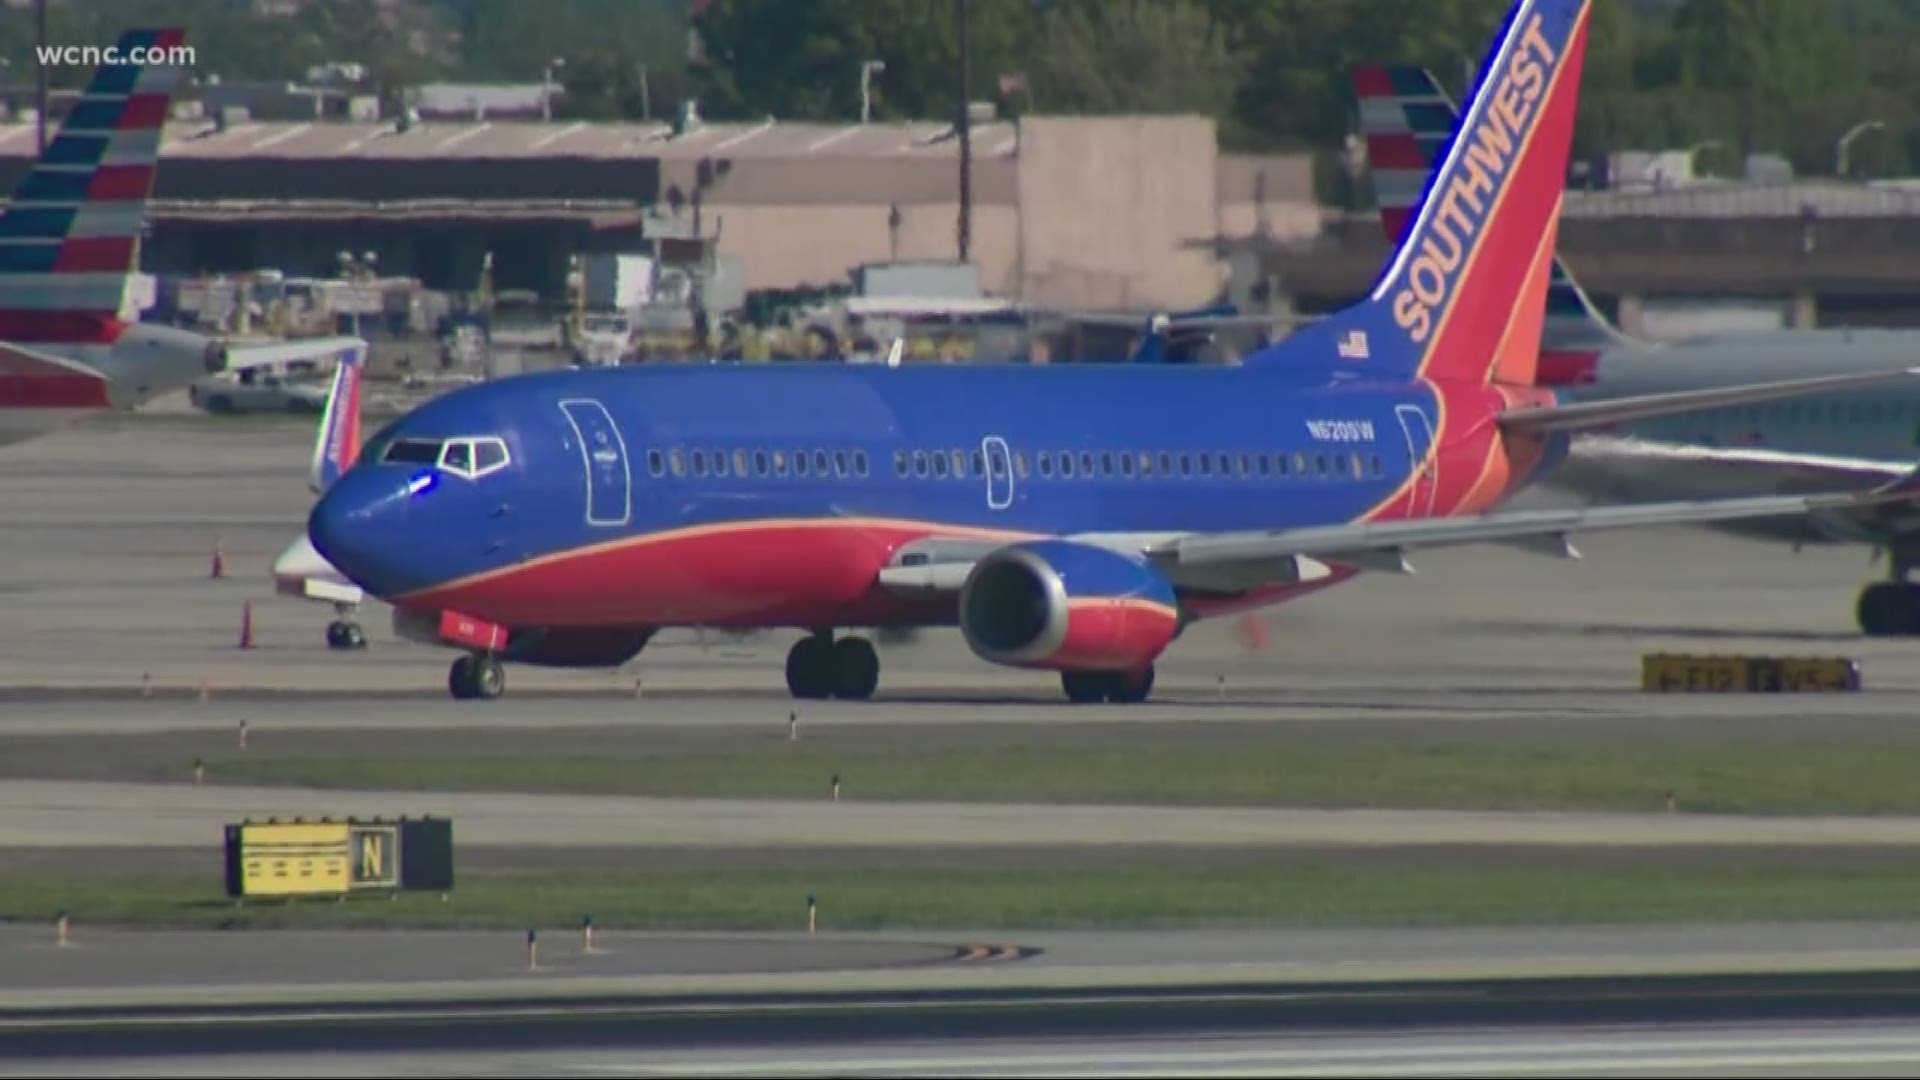 Investigators say Southwest Airlines flight 1380 landed at a high rate of speed.